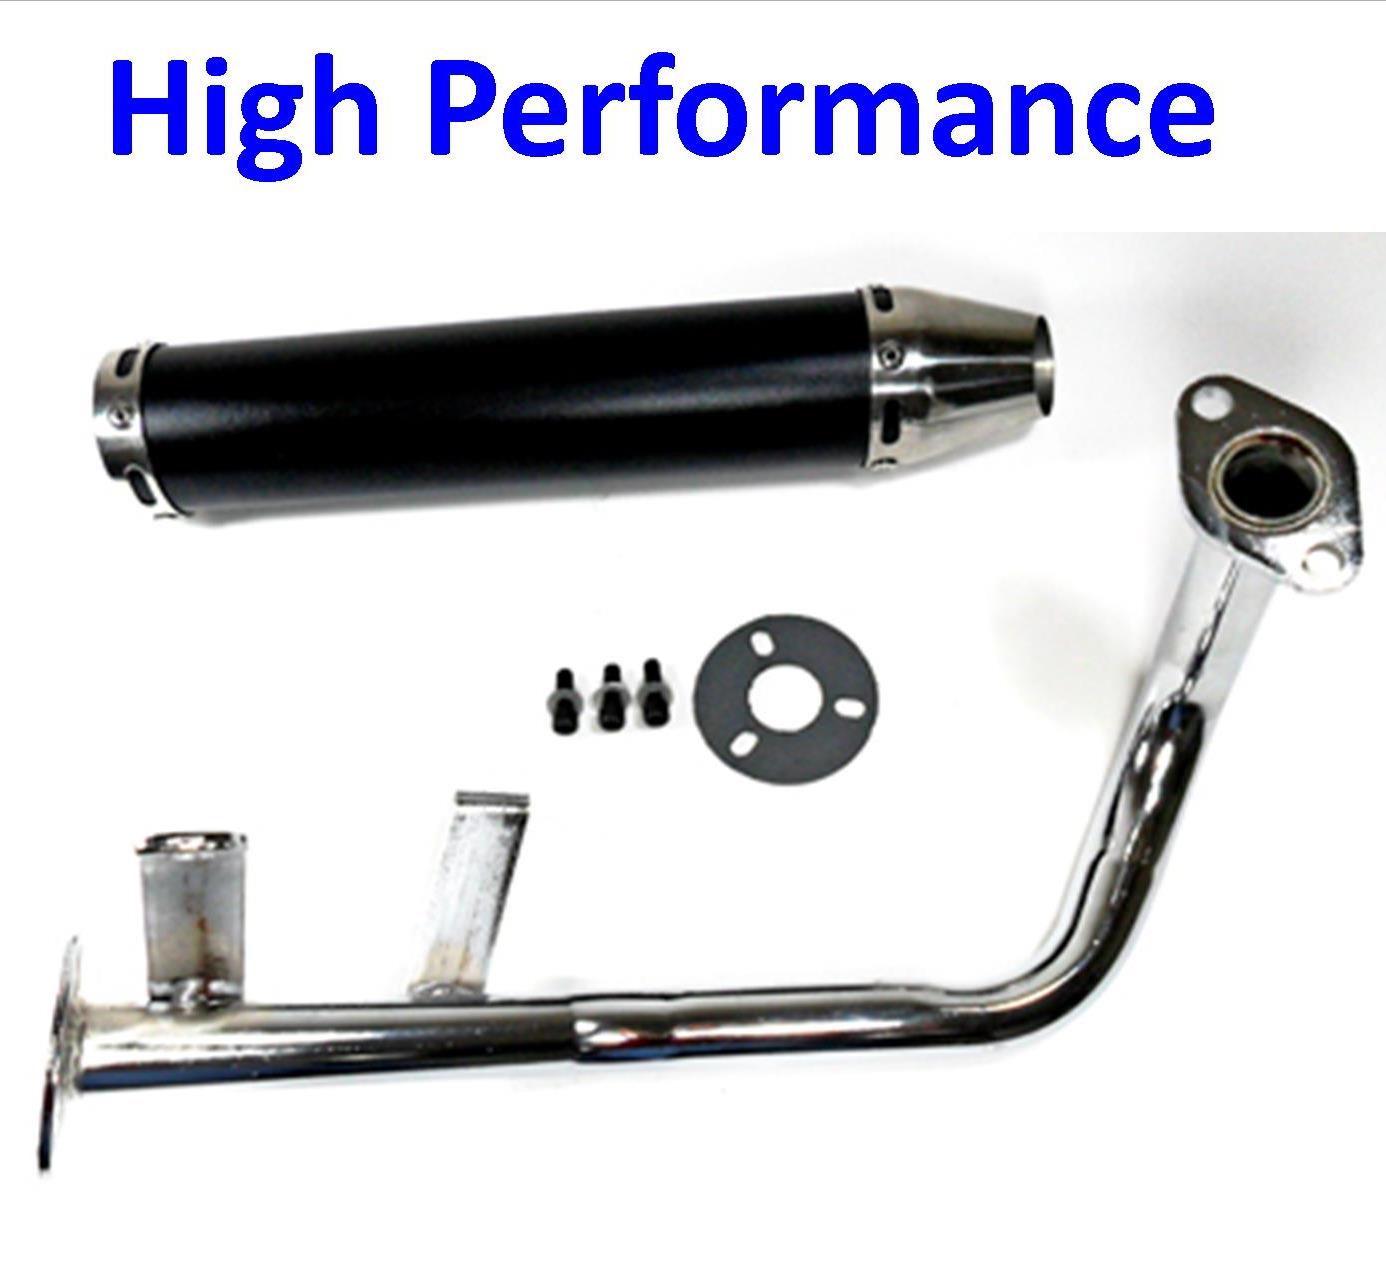 Exhaust Pipe HIGH PERFORMANCE BLACK/CHROME Fits Most GY6-50 QMB139 49cc Chinese Scooter Motors Canister L=280mm D=60mm